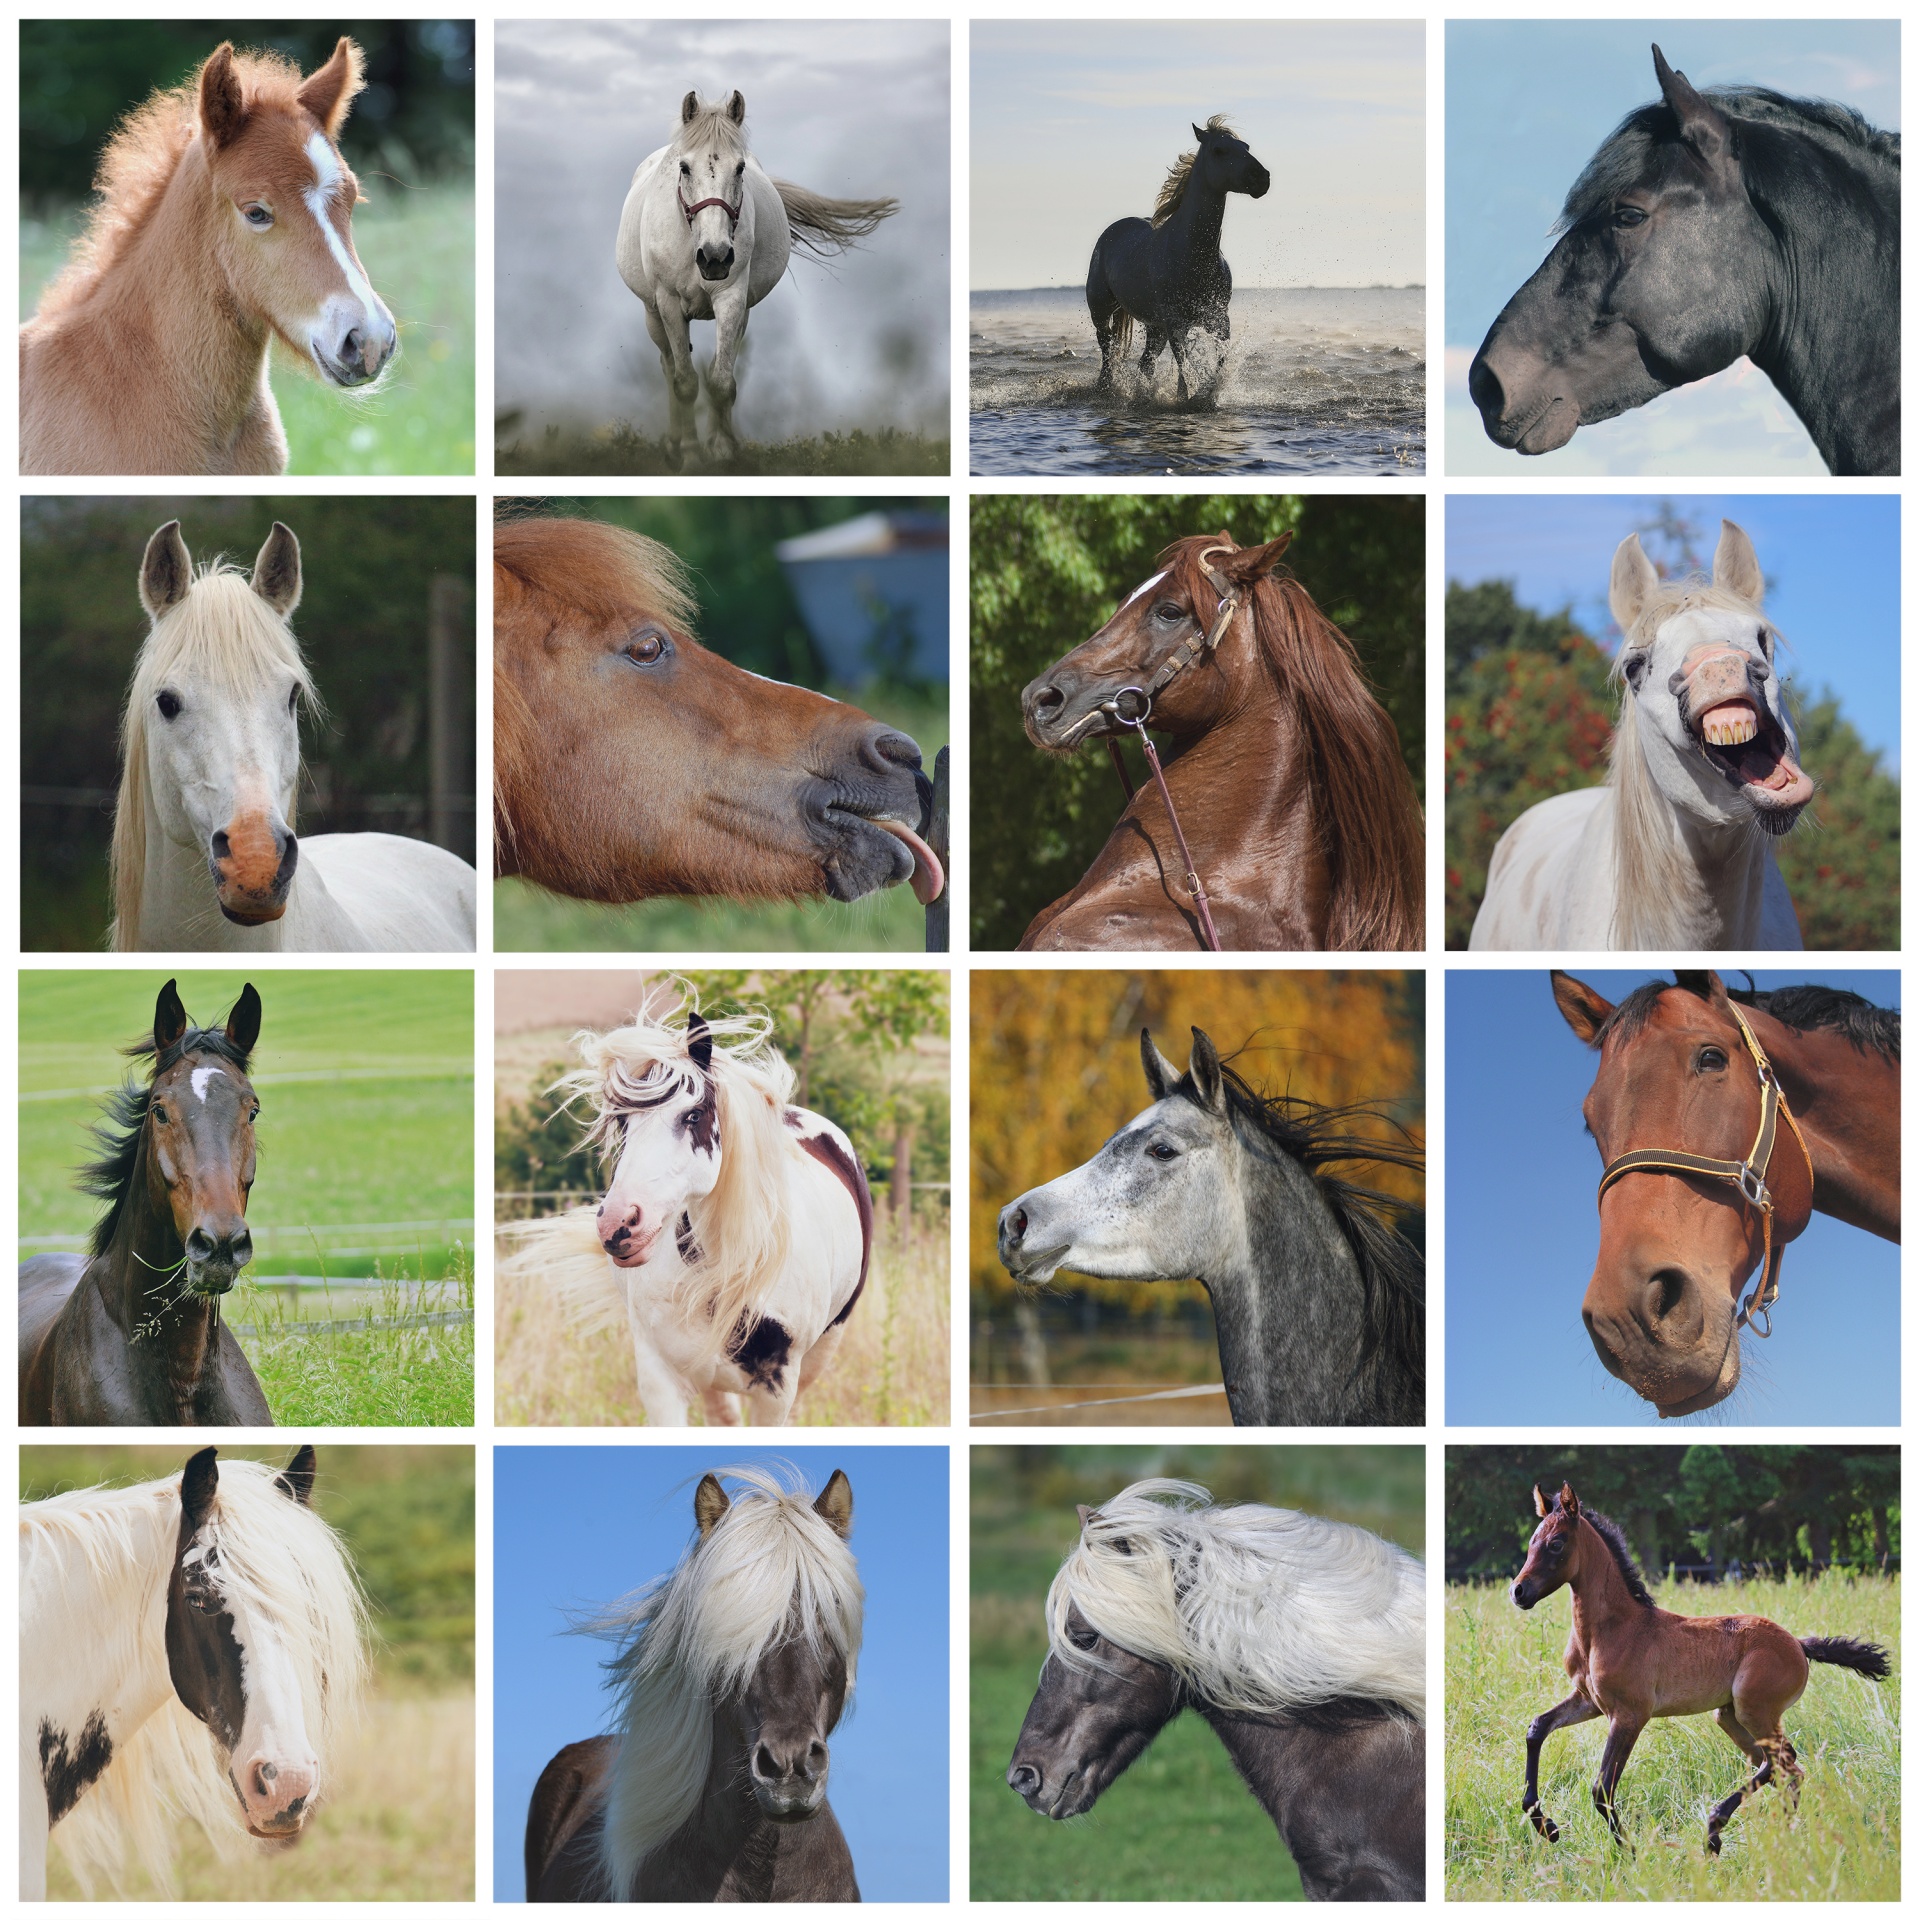 Horse Horses Wallpaper Free Photo - Horse Pictures Collage - HD Wallpaper 